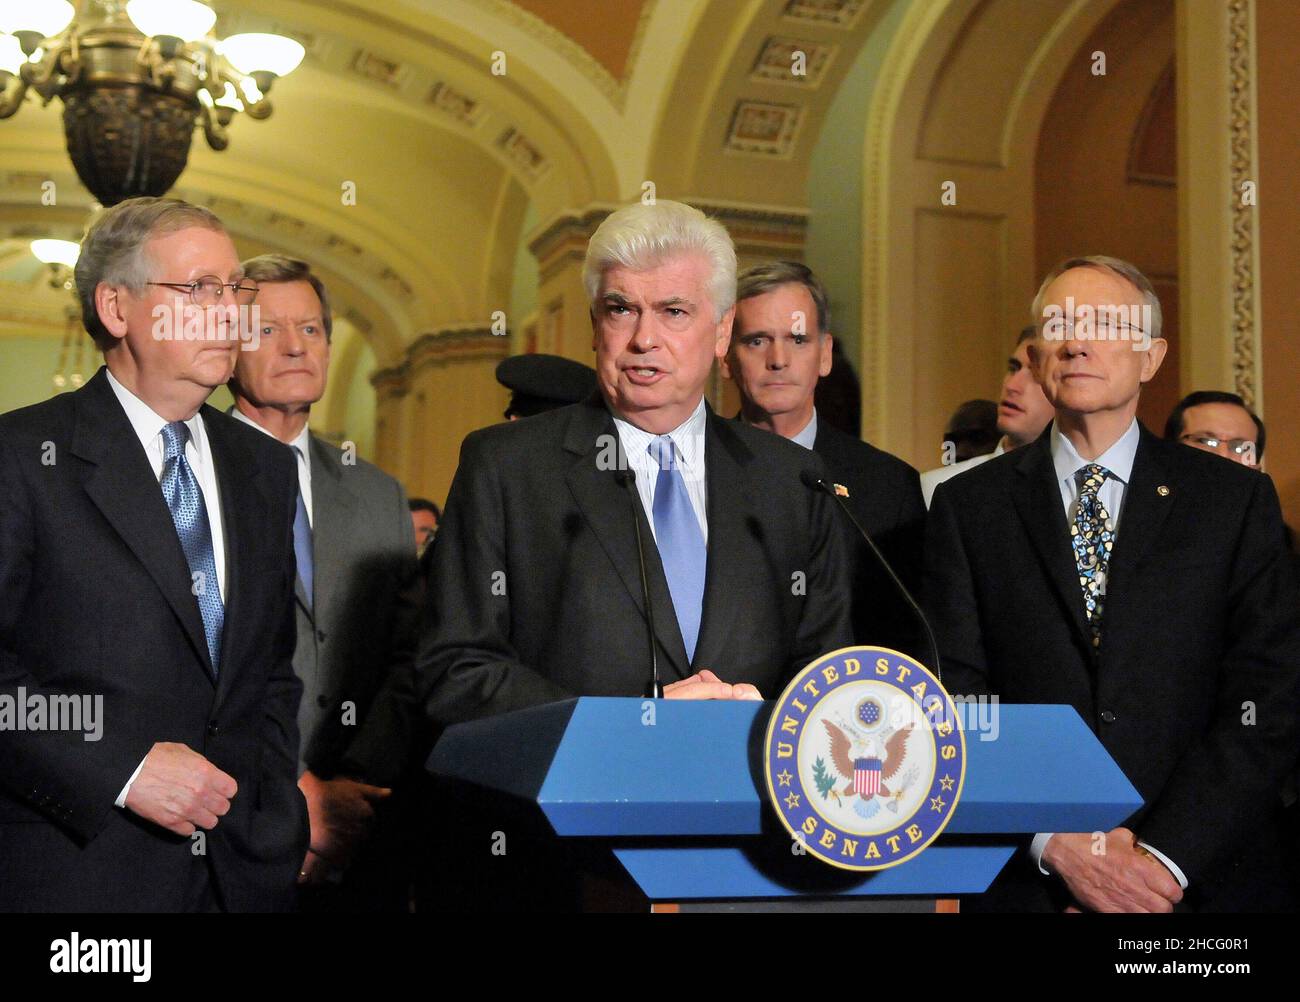 Washington, DC - October 1, 2008 -- United States Senator Chris Dodd (Democrat of Connecticut) makes a statement to reporters outside the United States Senate Chamber in the United States Capitol after casting votes to pass the 700 billion dollar Wall Street bail-out package in Washington, DC on Wednesday, October 1, 2008. From left to right: United States Senator Mitch McConnell (Republican of Kentucky), the Minority Leader; United States Senator Max Baucus (Democrat of Montana); Senator Dodd; United States Senator Judd Gregg (Republican of New Hampshire; and United States Senator Harry Rei Stock Photo